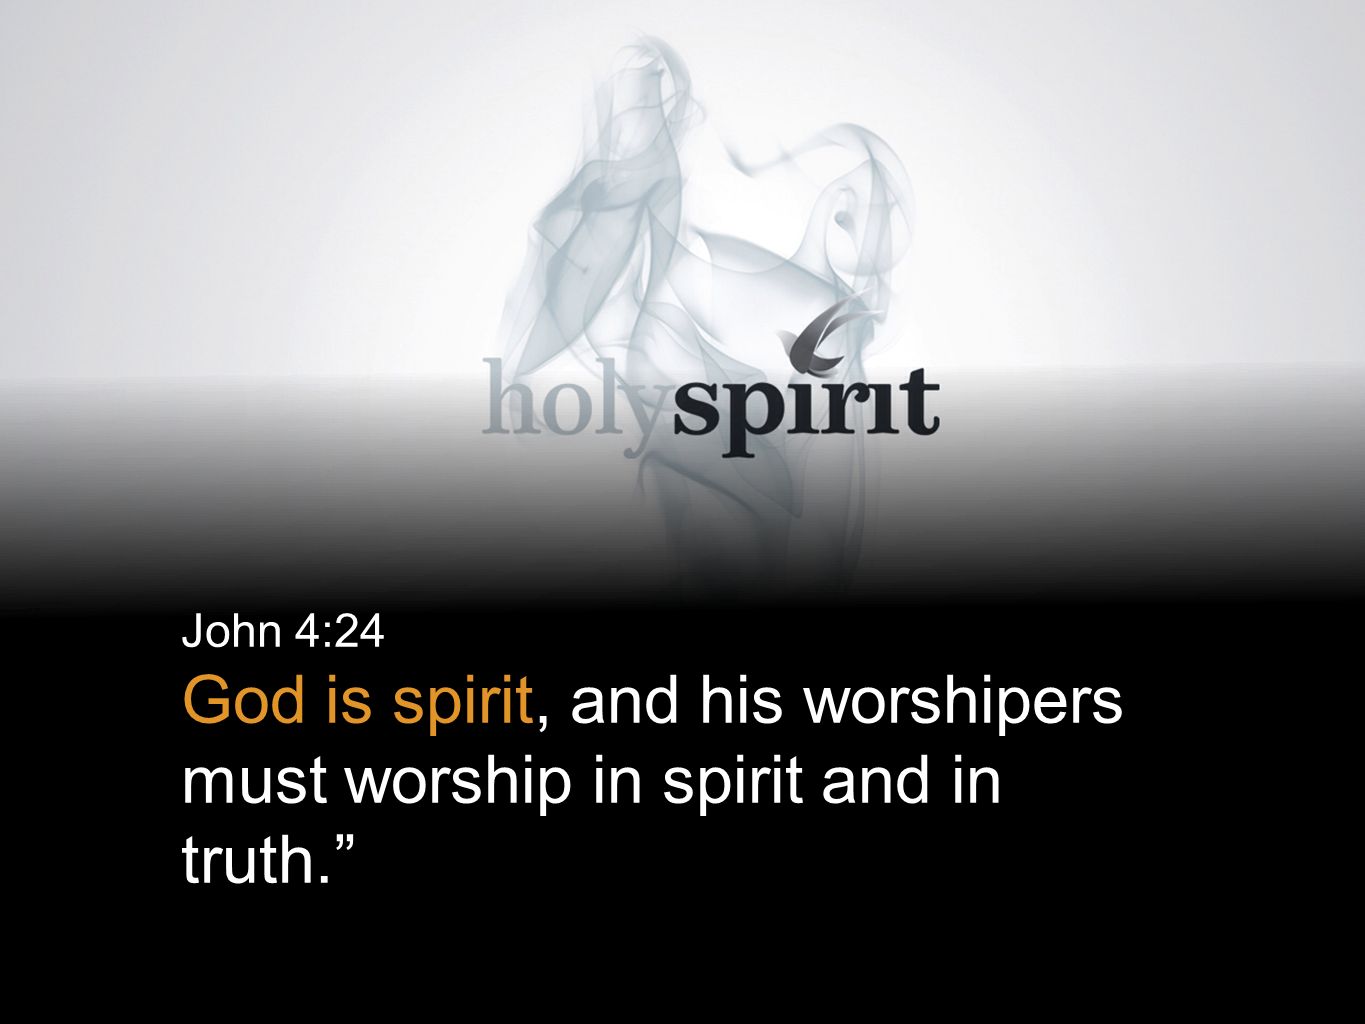 John 4:24 God is spirit, and his worshipers must worship in spirit and in truth.